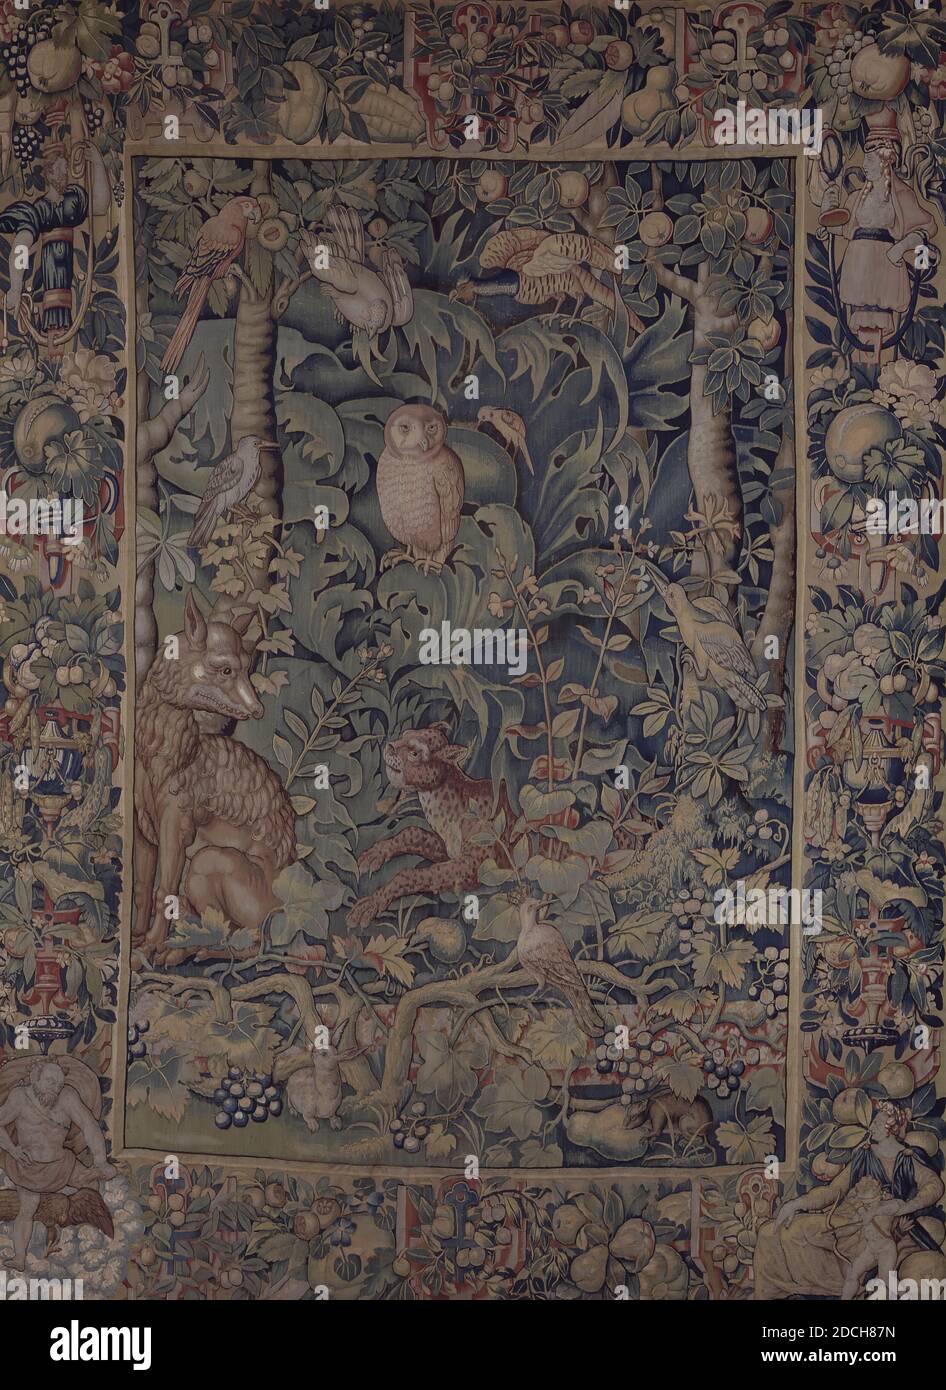 tapestry, Willem Andriesz. de Raedt, 1550 - 1558, woven, General: 312.5 x 231.5cm, cat, allegory, fox, rabbit, owl, cupid, venus, wolf, jupiter, lead, Painted room paneling with double doors, room paneling with one door and a mantelpiece, part of an 18th century interior. The paneling is made up of panels placed in frames which are provided with simple wood carvings. The compartments in both the single and double door paneling are lined with a modern yellow fabric. The chimney piece is also provided with rich wood carvings. The mantelpiece is made of gray marble, with a cut frame for a mantel Stock Photo